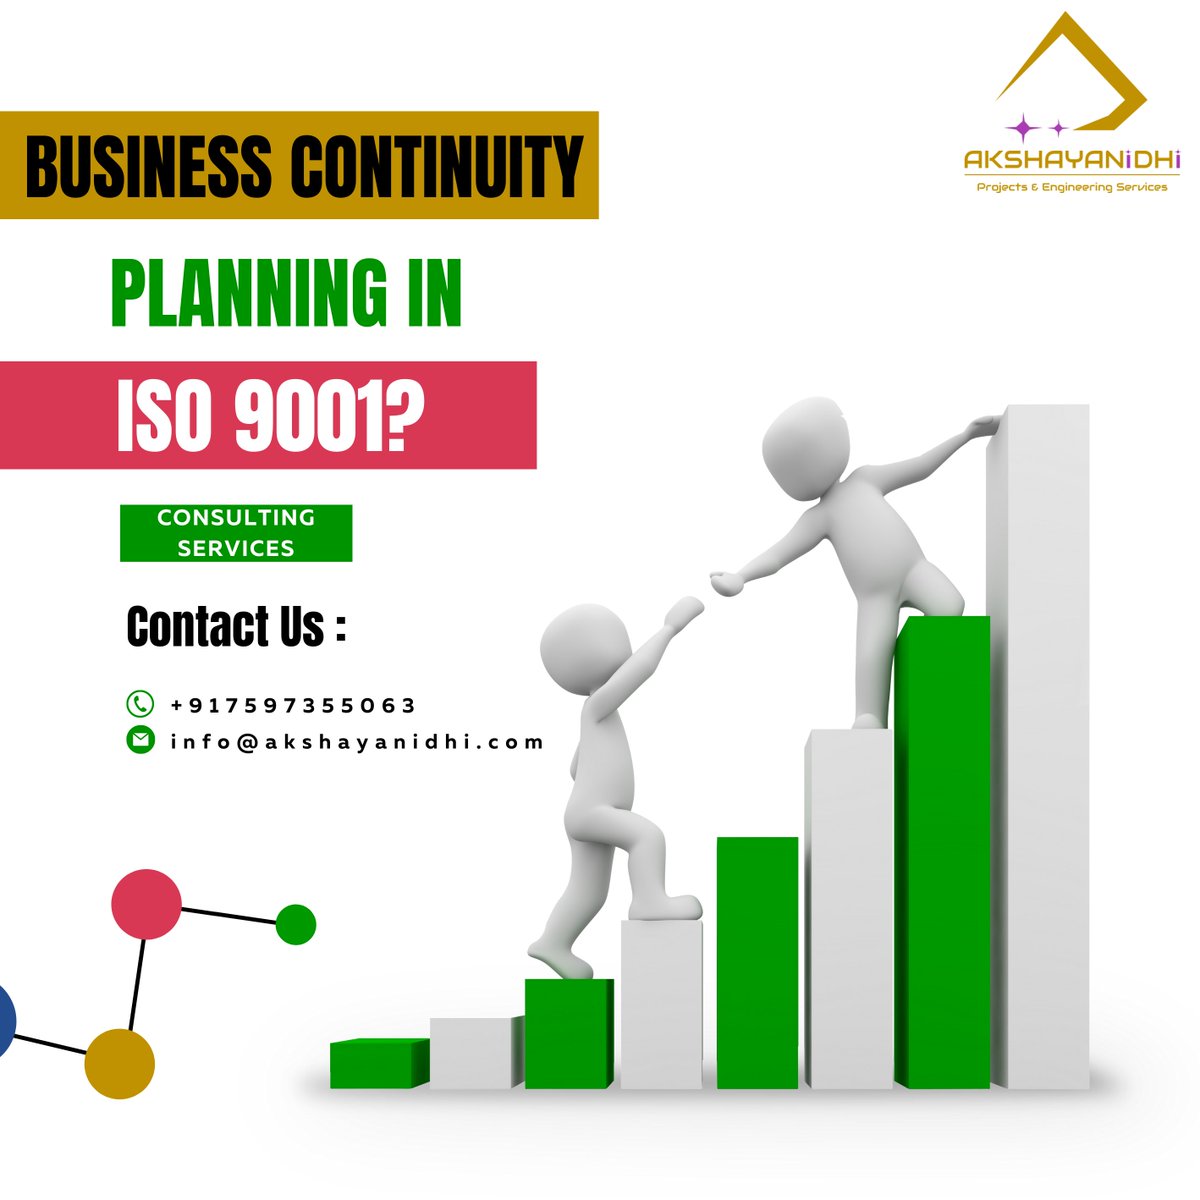 'Streamline Your Business Continuity with Our ISO 9001 Consulting Services'

𝐂𝐨𝐧𝐭𝐚𝐜𝐭 𝐮𝐬 -
𝐂𝐚𝐥𝐥: +917597355063
𝐄𝐦𝐚𝐢𝐥: info@akshayanidhi.com

#bussinessdevelopment #bussinessanalyst #bussinessowner #bussinessintelligence #bussinessideas #bussinessideas #bussiness